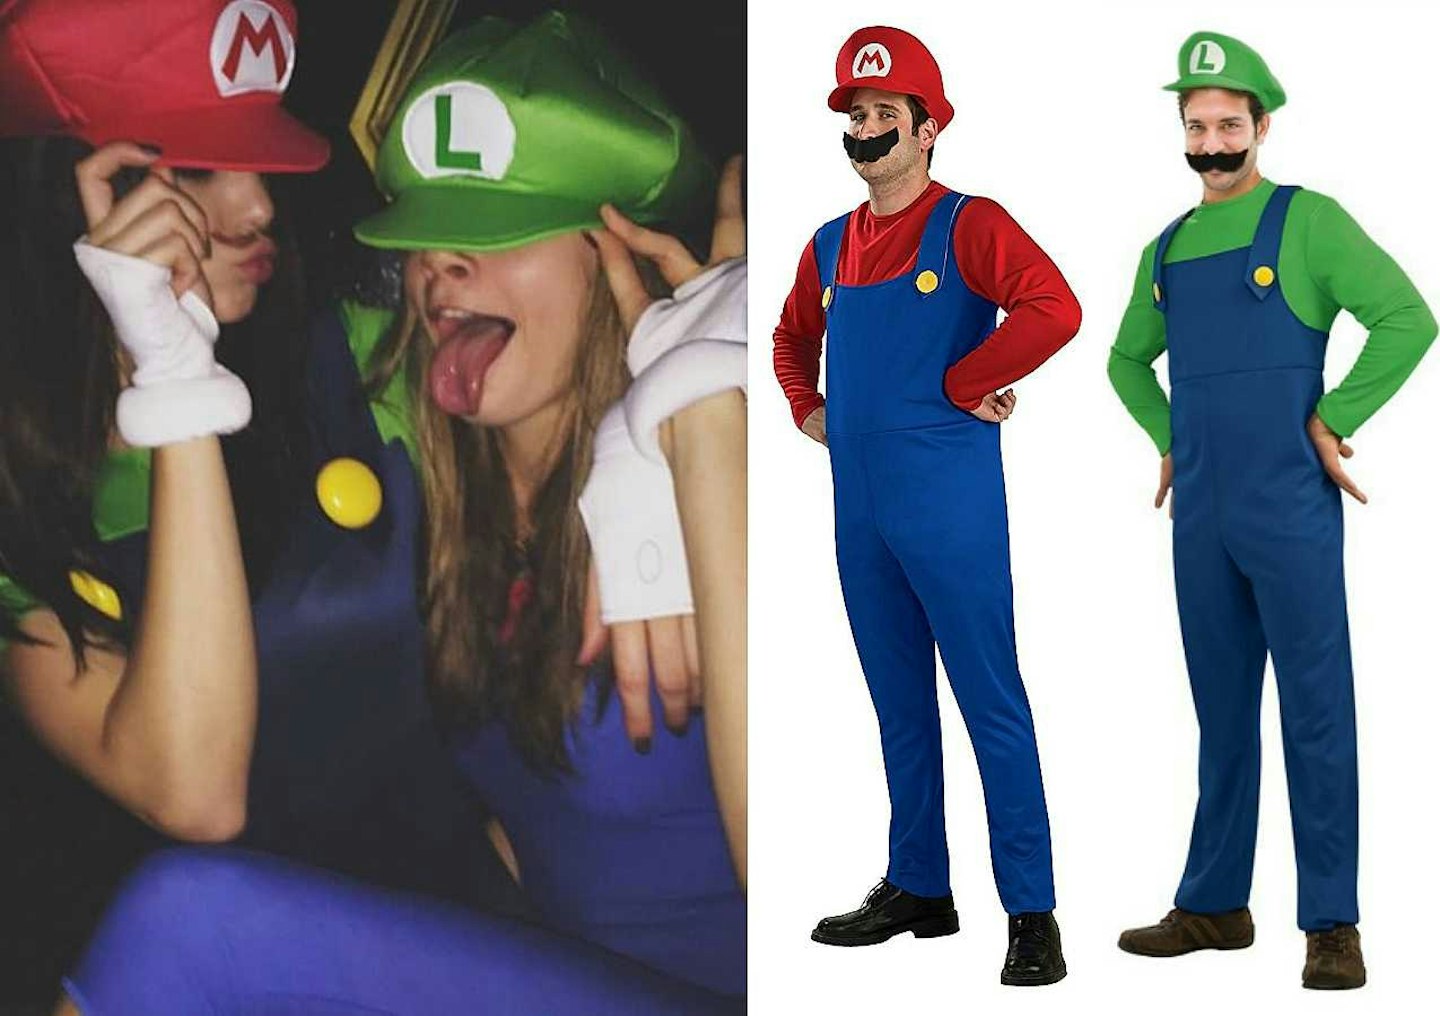 Kendall Jenner and Cara Delevingne as Mario and Luigi